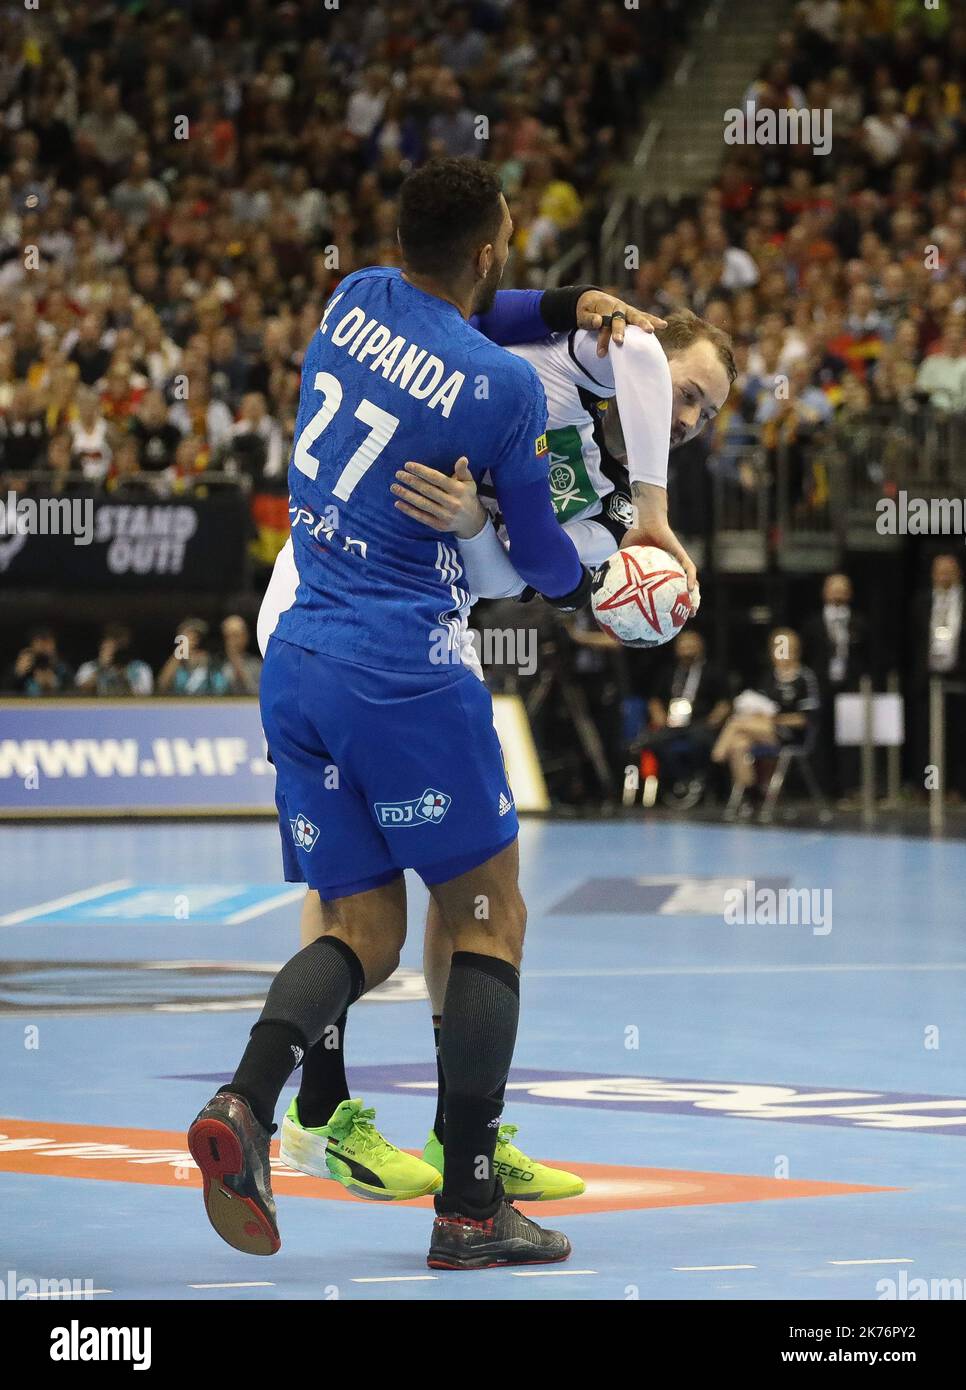 Steffen Fath (Germany) and Adrien Dipanda (France) during the IHF Men's World Championship 2019, Group A handball match between Germany and France on January 15, 2019 at Mercedes-Benz Arena in Berlin, Germany  Stock Photo